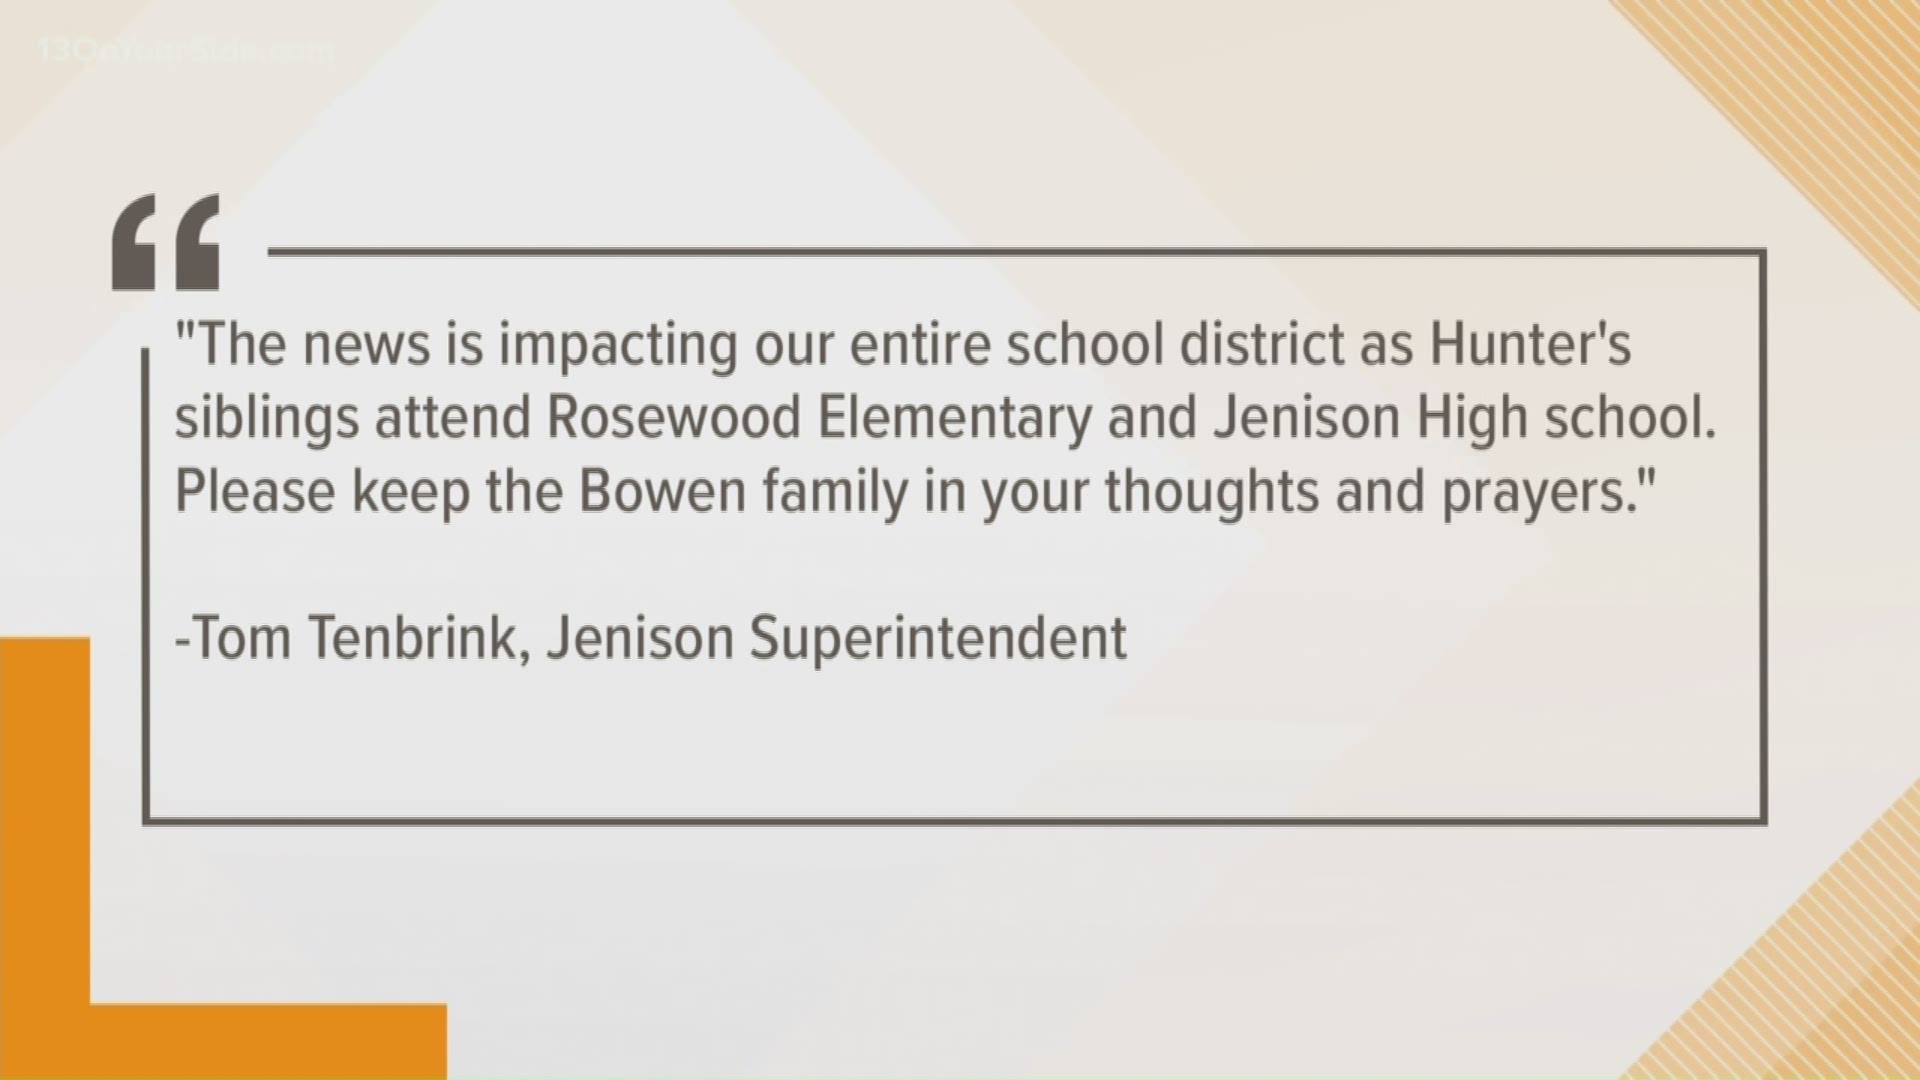 A sophomore at Jenison High School did not wake up from his sleep Monday morning, according to the district.